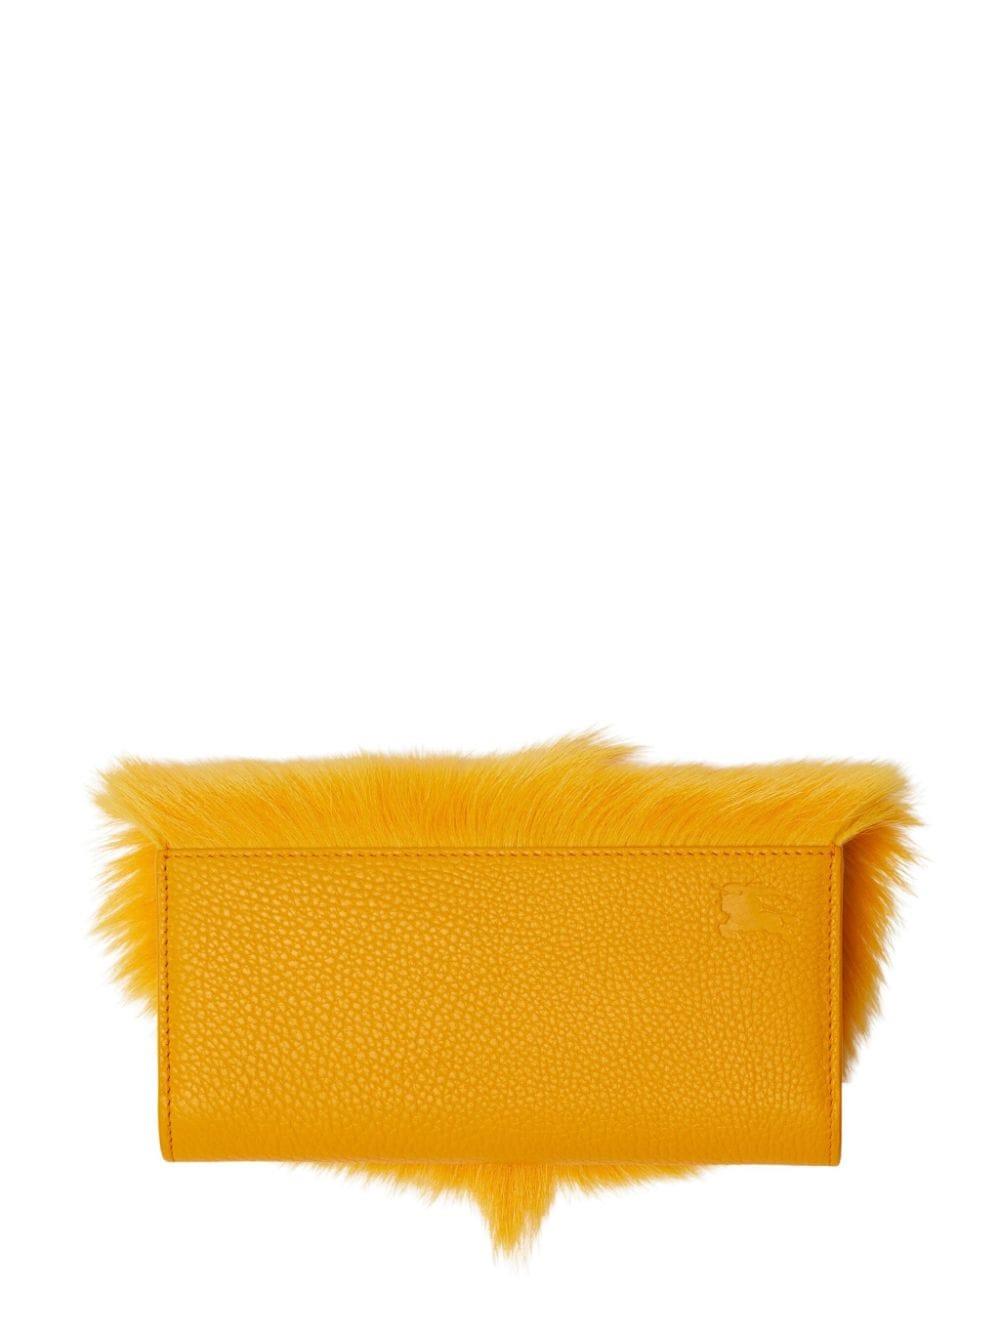 Burberry Chess continental wallet - Yellow